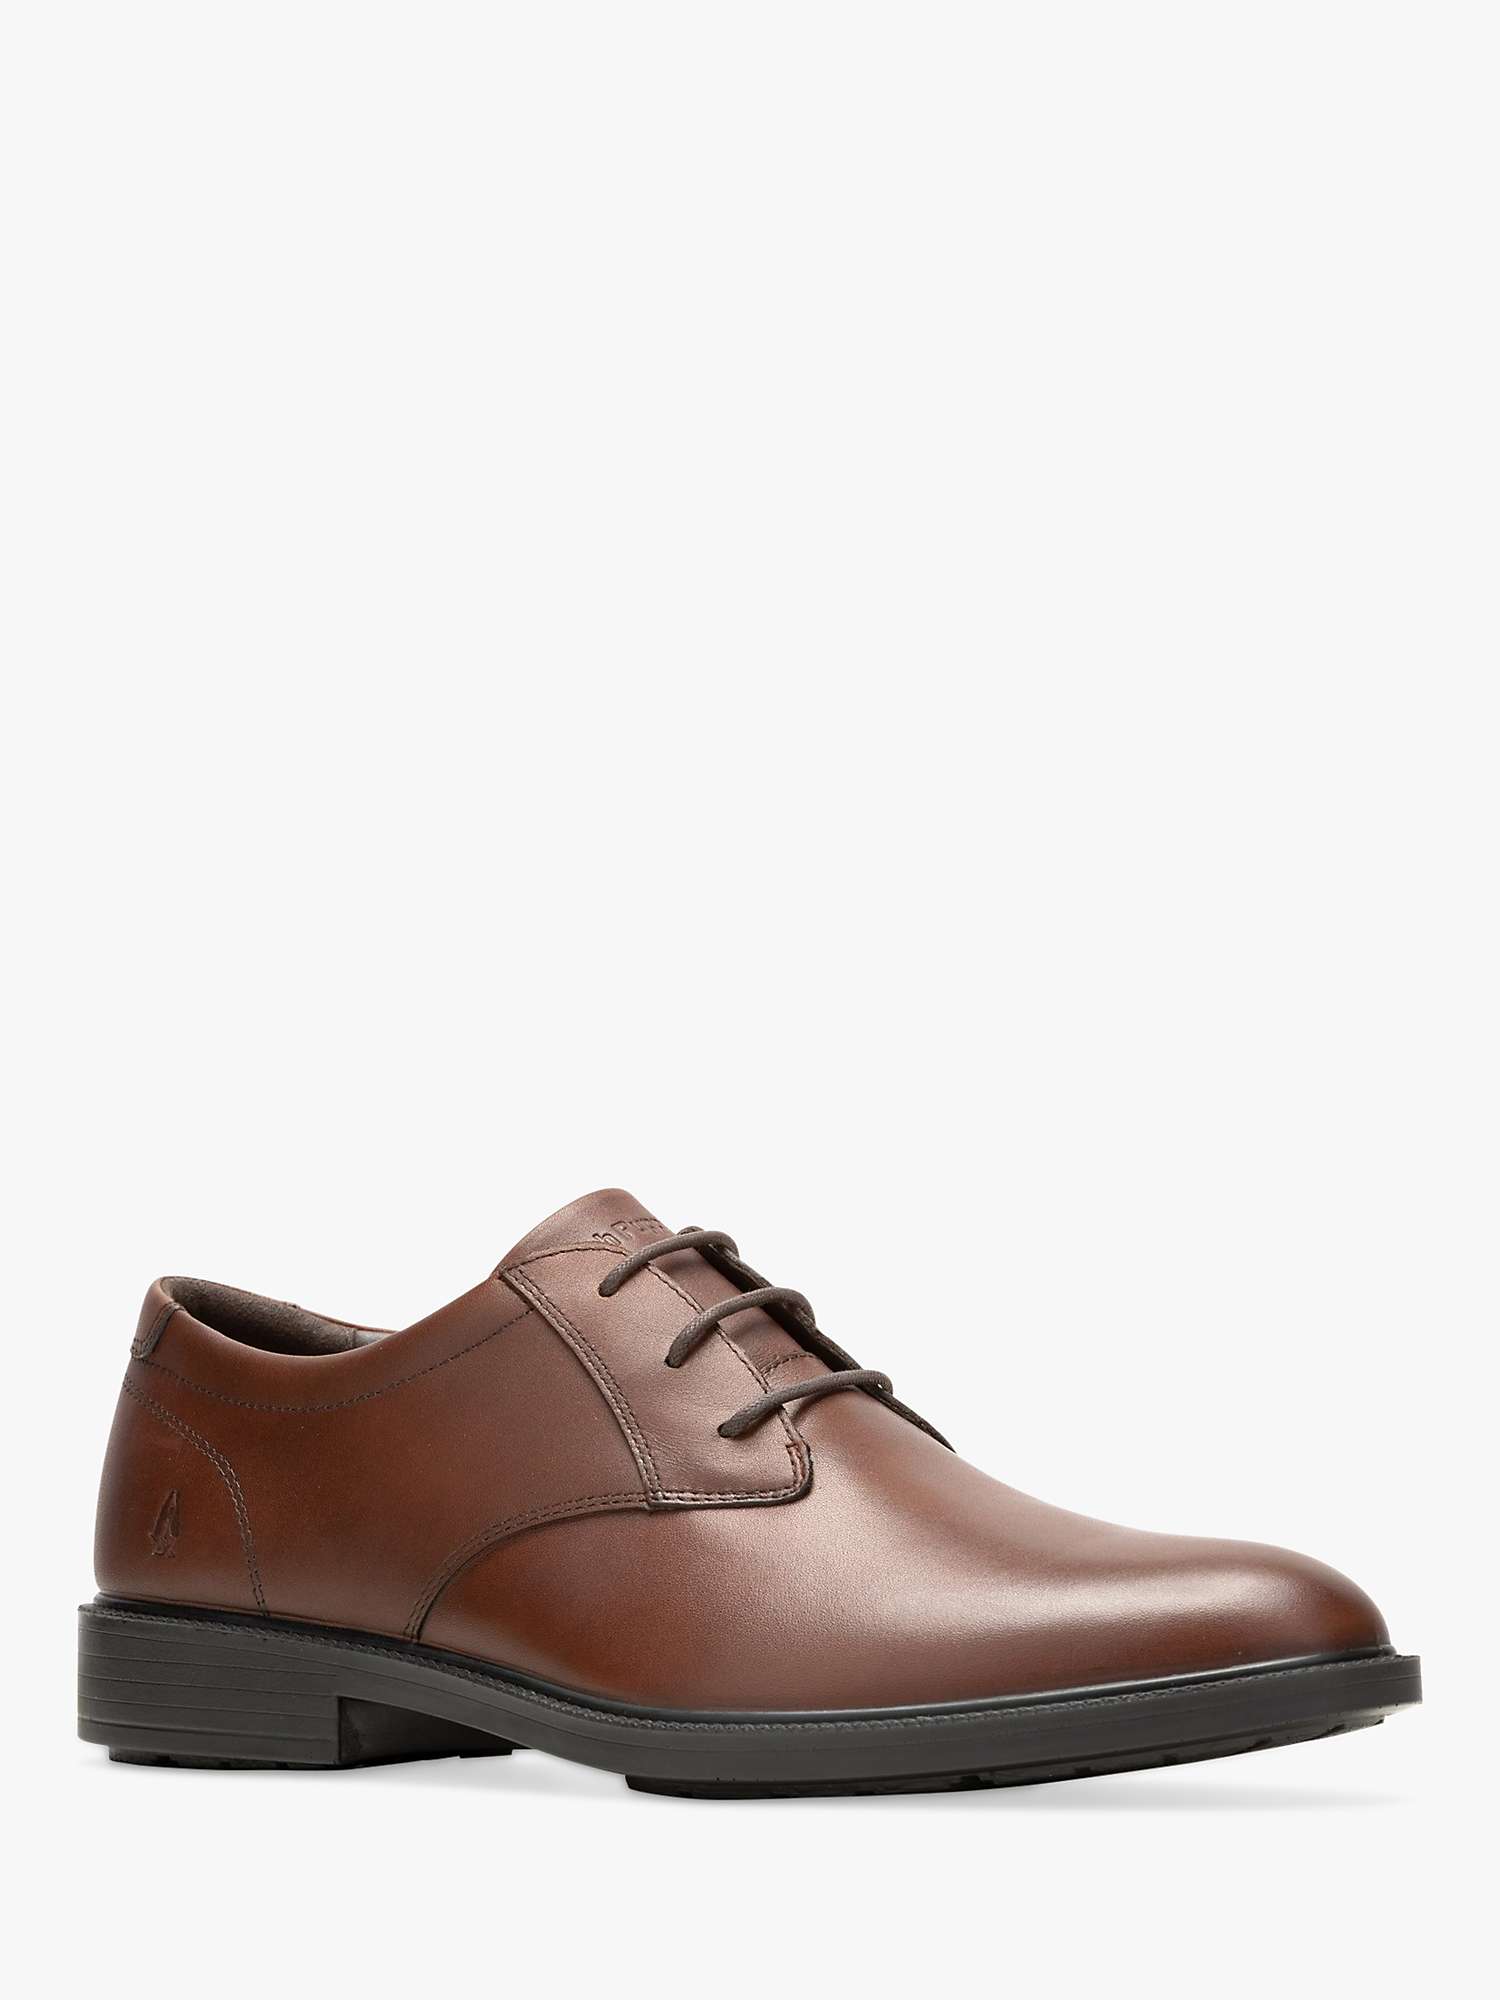 Buy Hush Puppies Banker Lace-Up Shoes Online at johnlewis.com